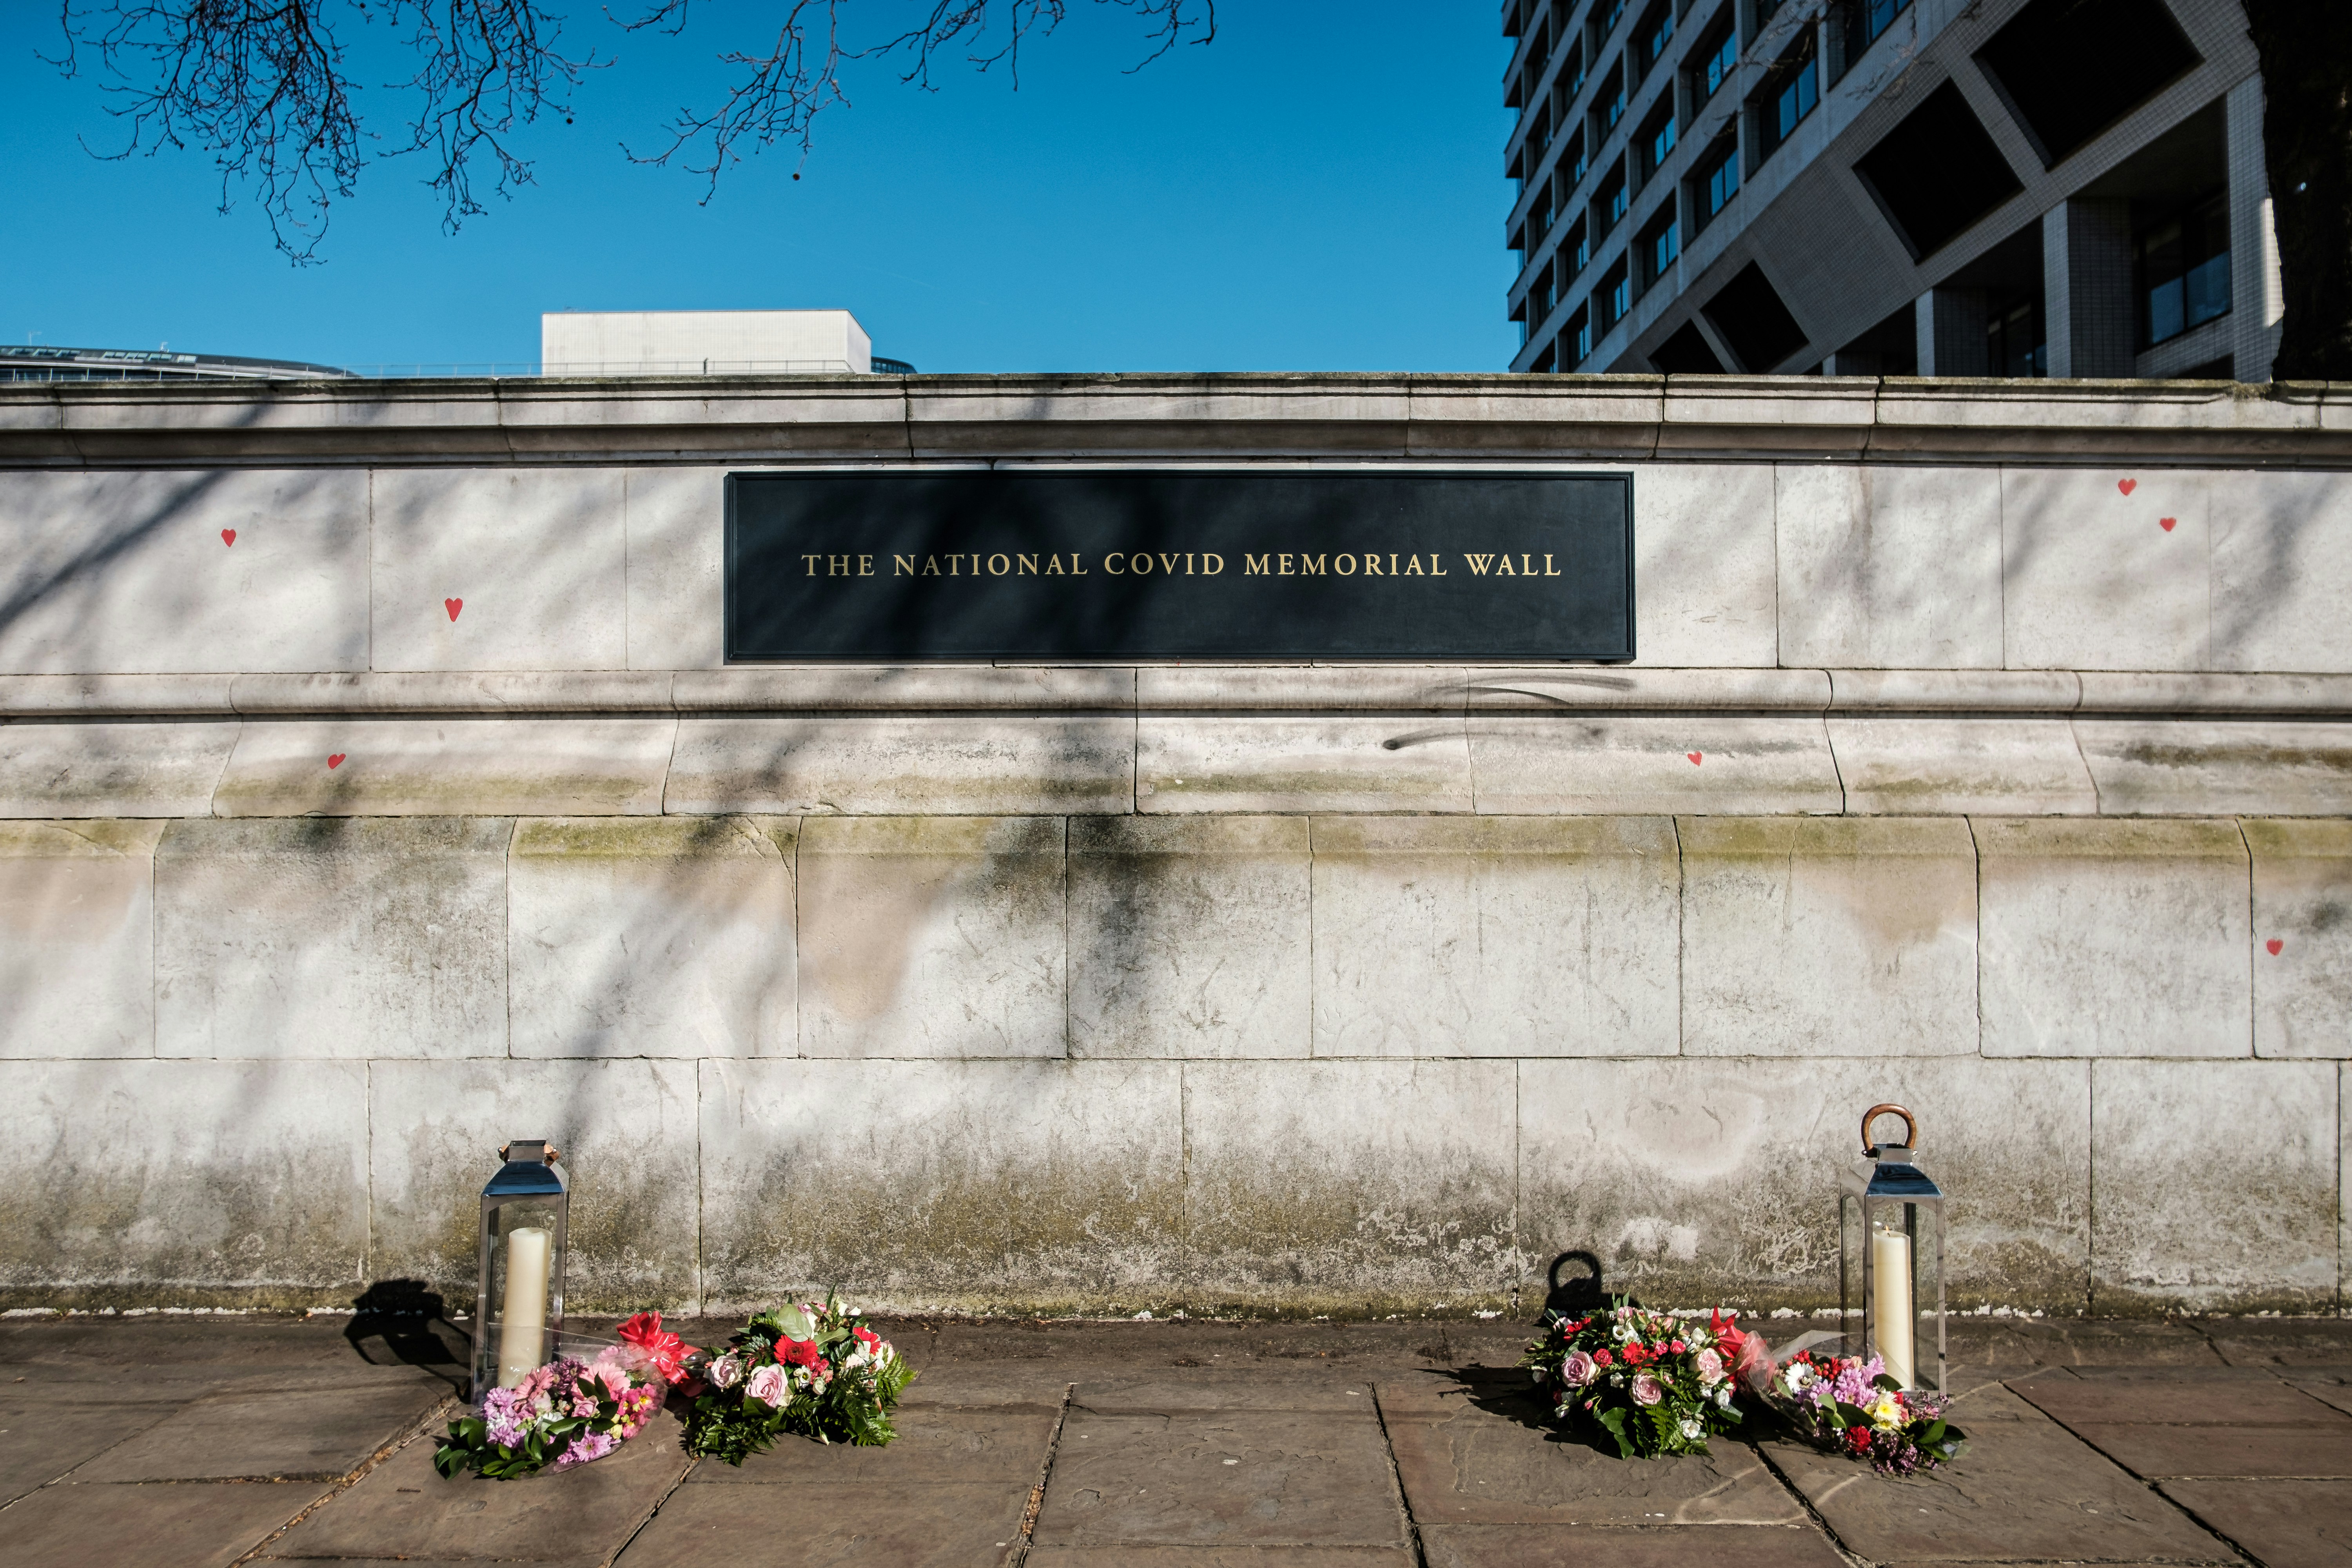 It has been over a Year since Coronavirus struck and shut down the UK; Today Near St Thomas Hospital a National Memorial has been set up to allow people to pay their respects and to mark the walls of the Queen's Walk with Love Hearts, Labour Leader Keir Starmer made is the presence and talked to the few who spent most of today adding Hearts to the walls.